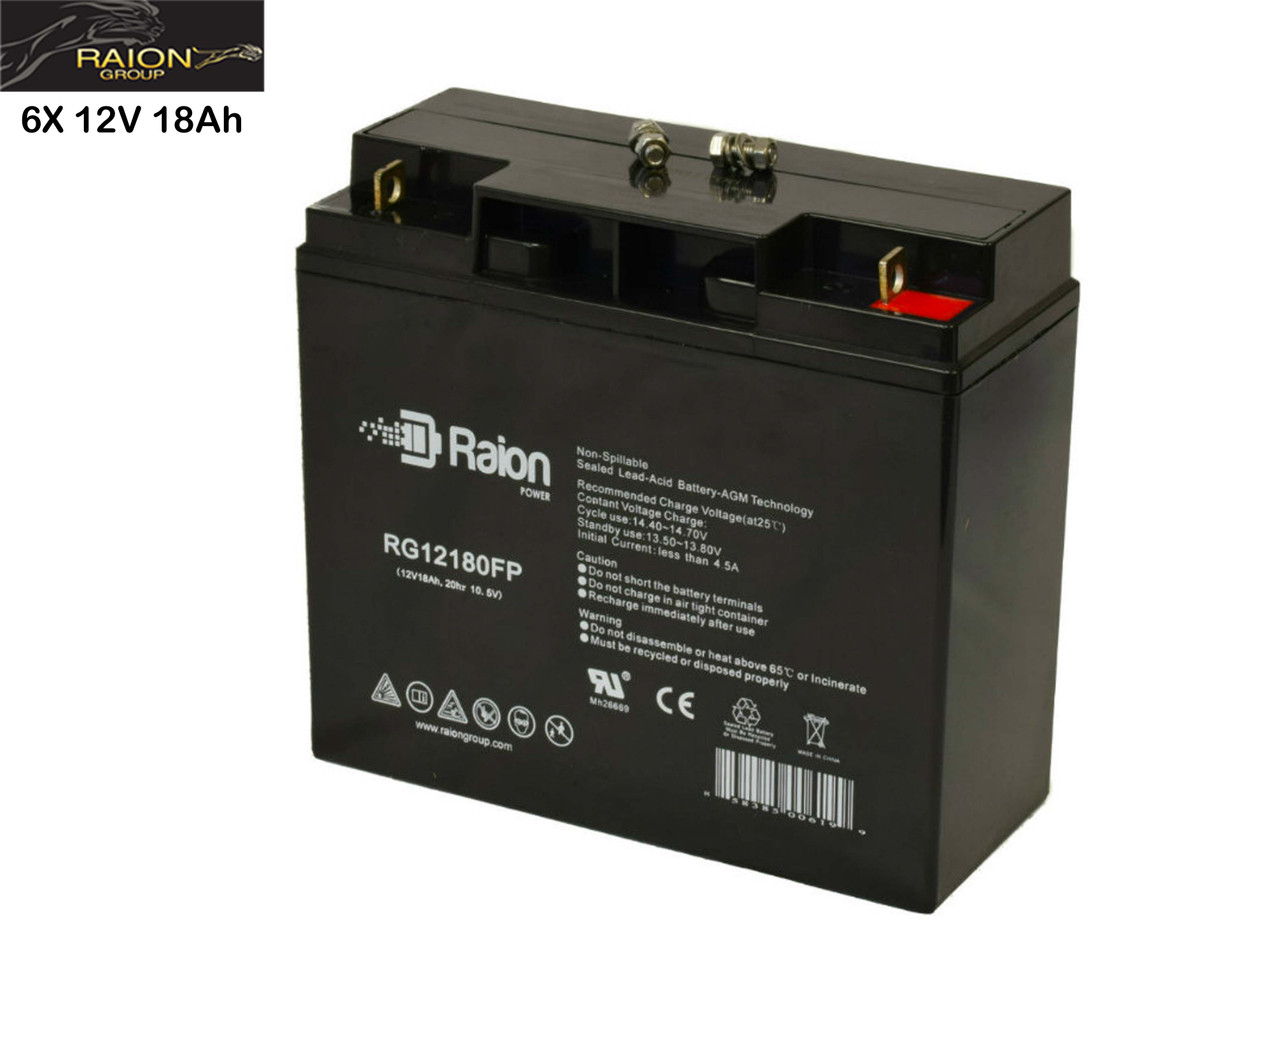 Raion Power Replacement 12V 18Ah Battery for Fun E-Cycle E-Scooter ASTRO - 6 Pack